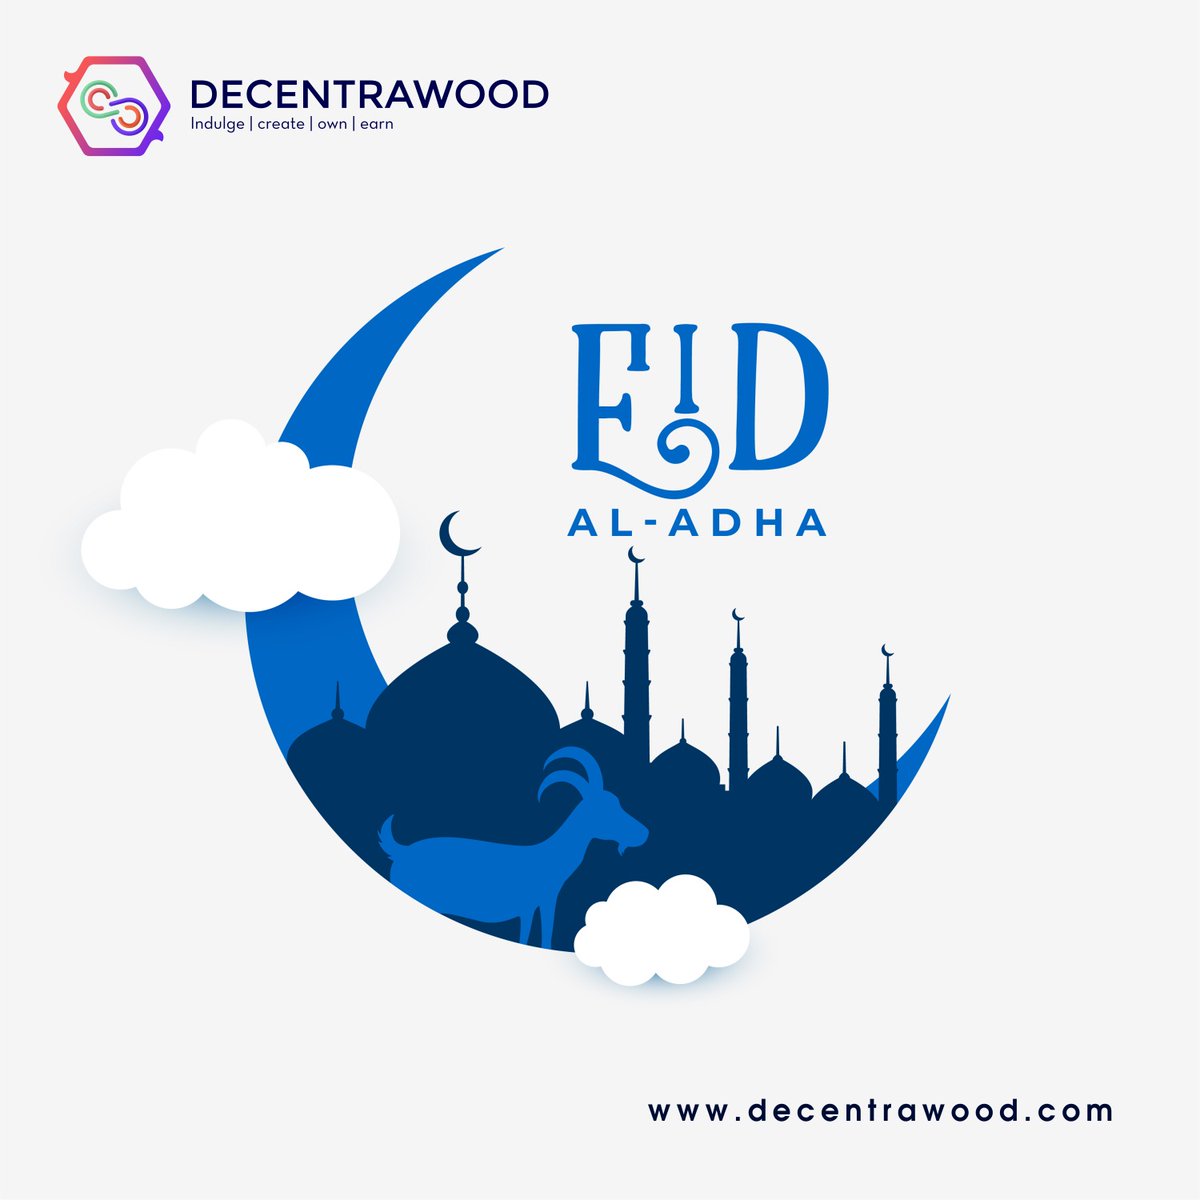 Decentrawood Wishing You All a Very Happy Eid-Al-Adha.

#decentrawood #metaverse #nft #landparcel #virtualreality #augmentedreality #cryptocurrency